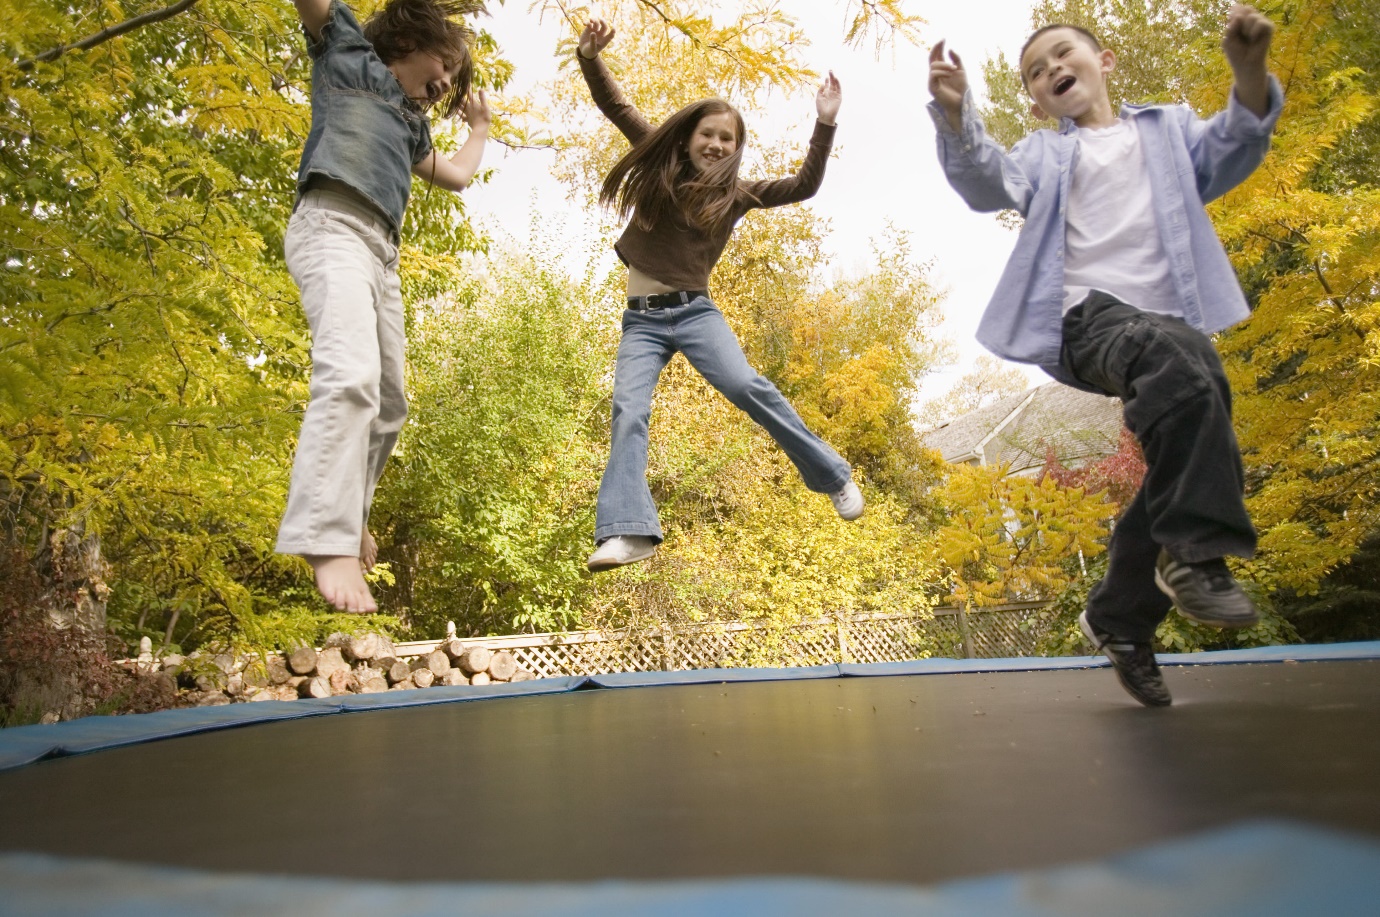 2 Tips When Searching for Affordable Trampolines for Kids